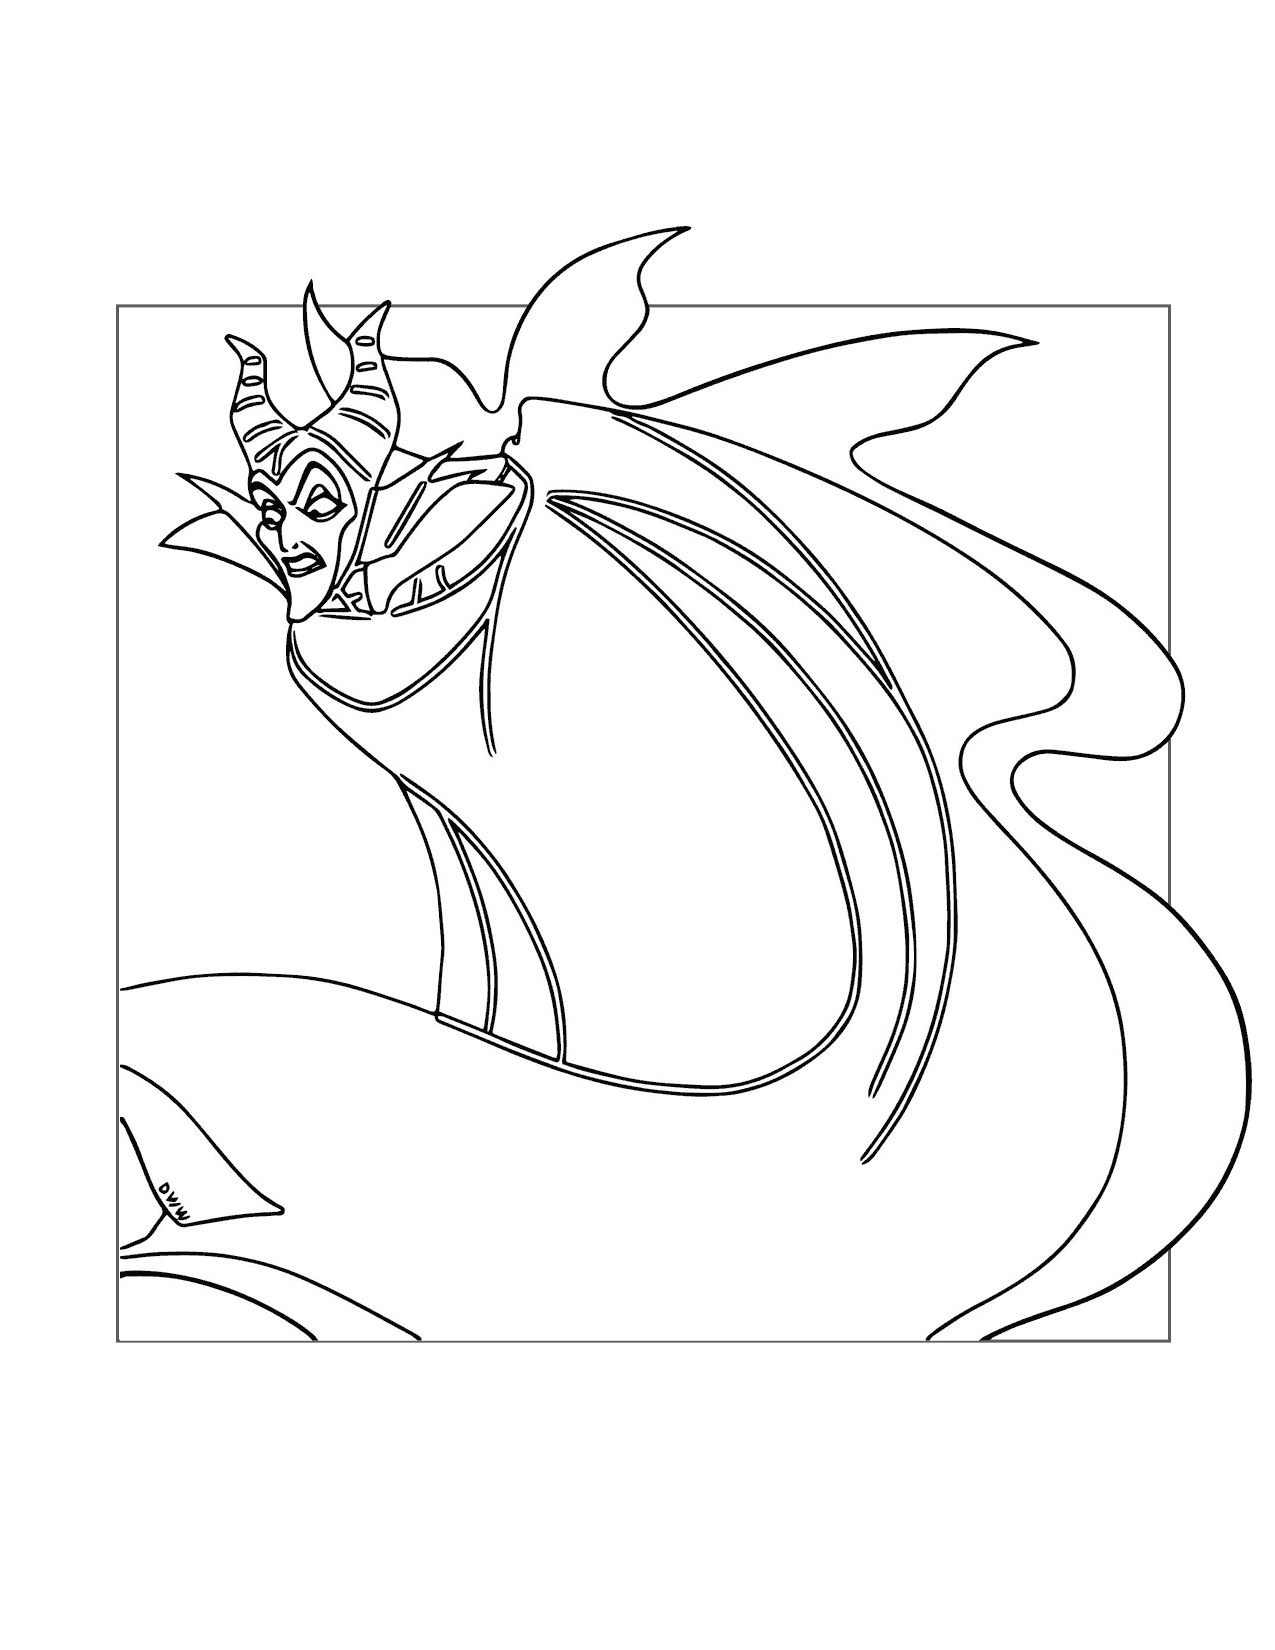 Maleficent Is Angry Coloring Page